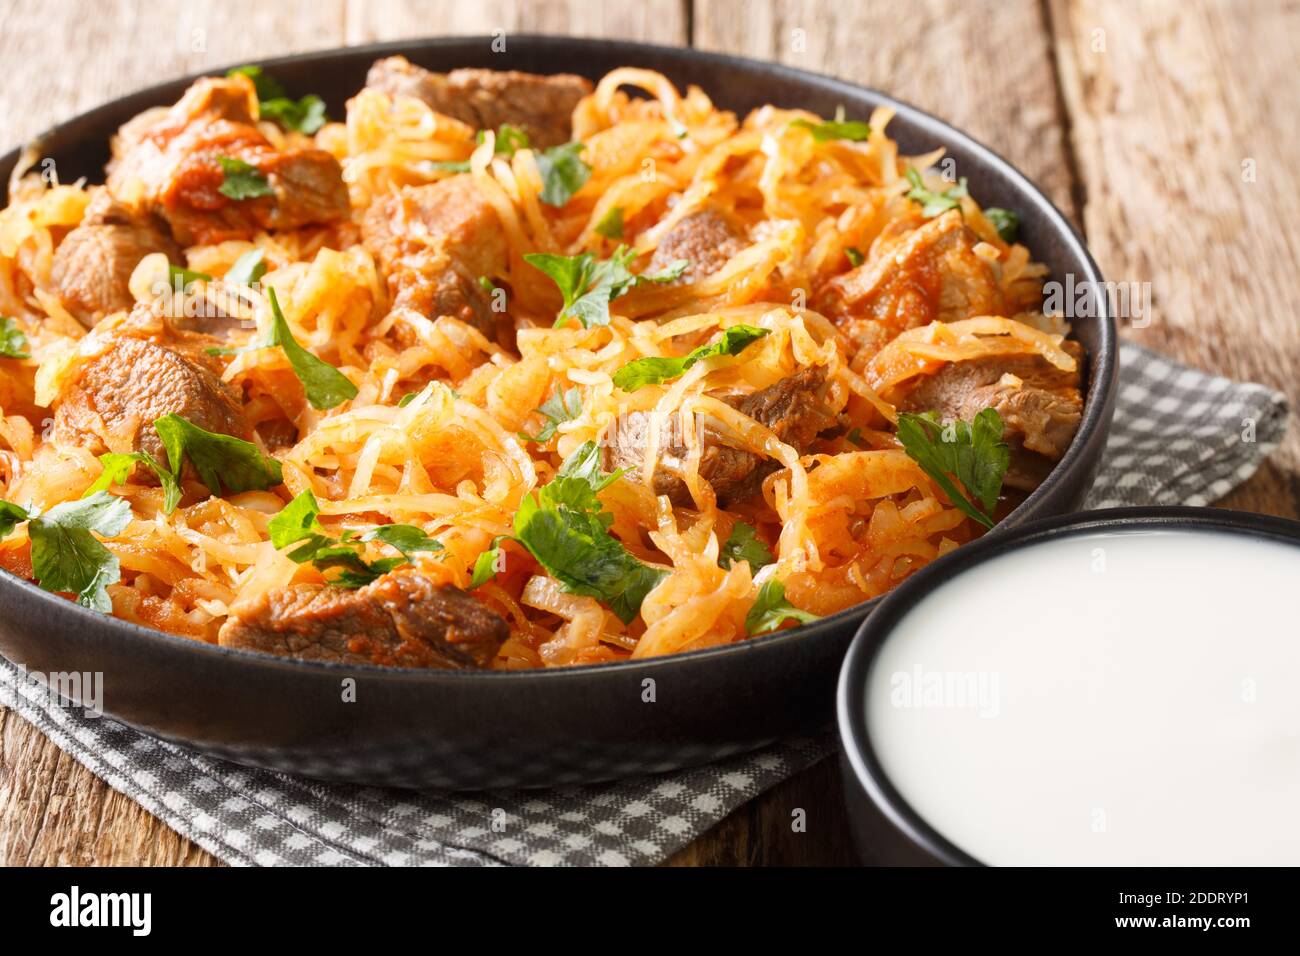 Sauerkraut stew with pork and paprika close-up in a plate on the table. horizontal Stock Photo